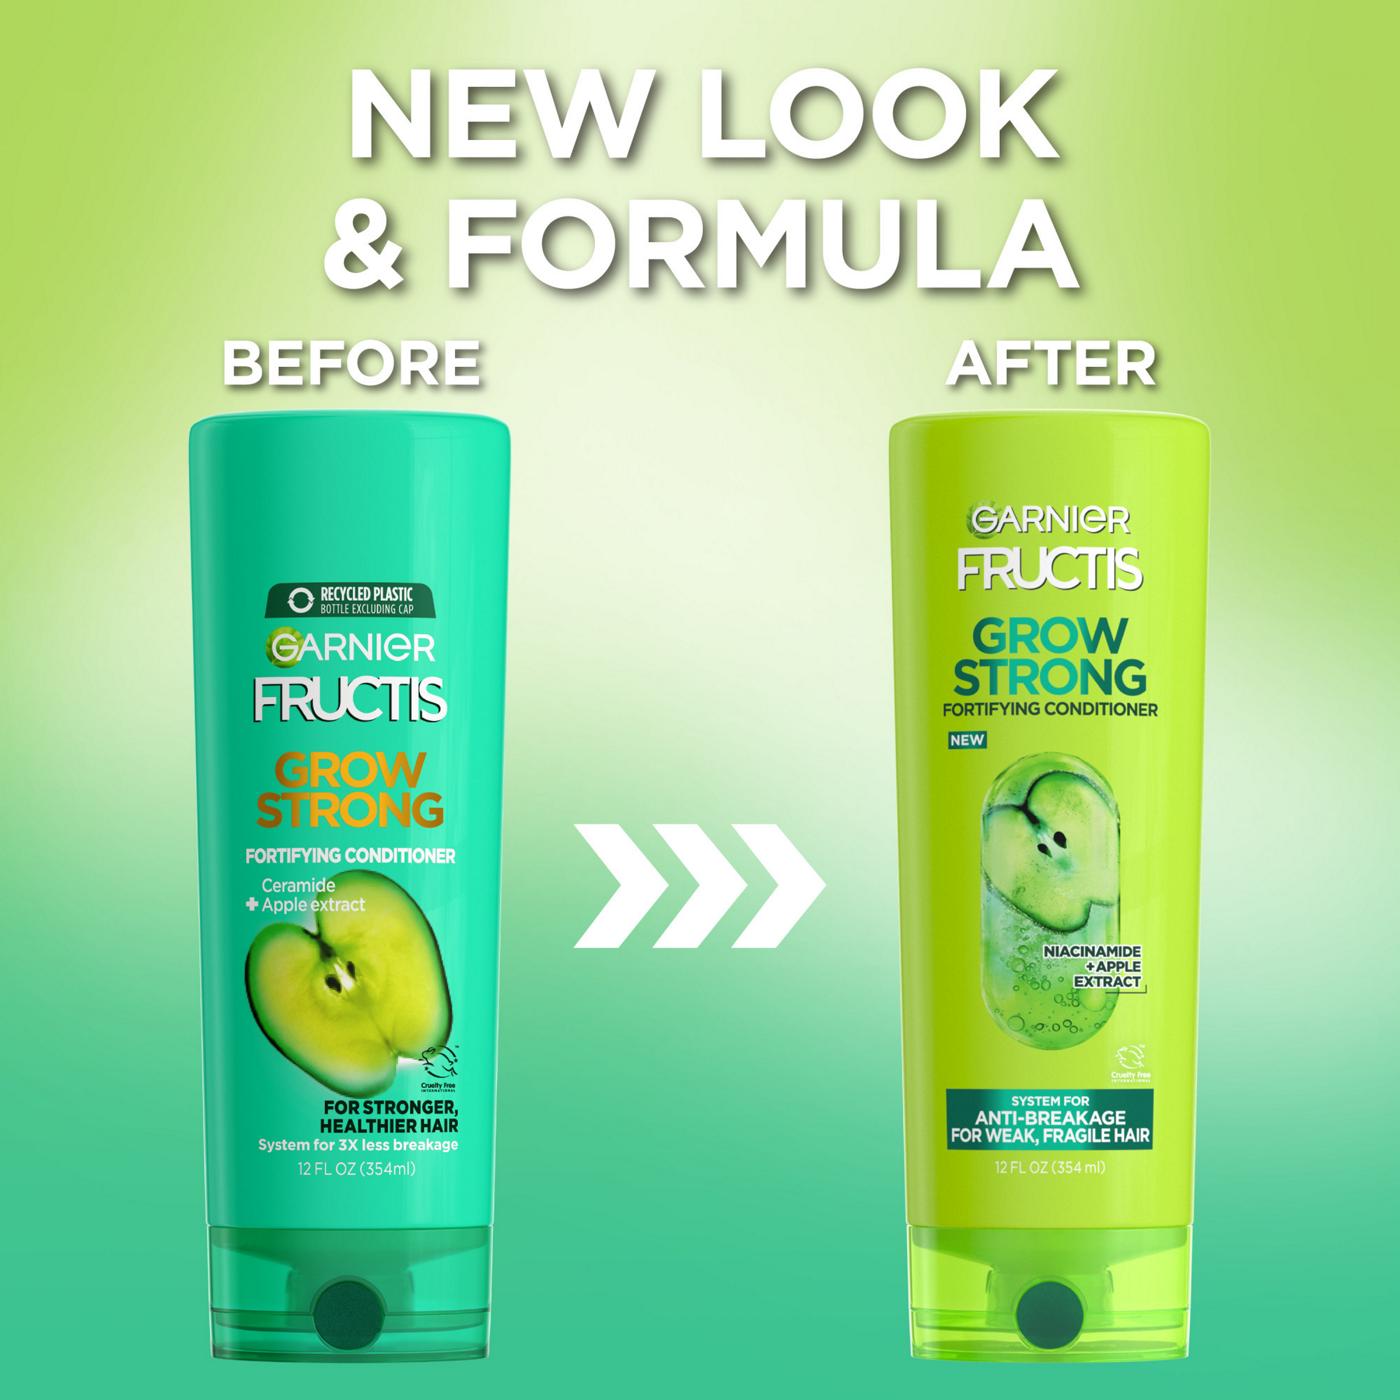 Garnier Fructis Grow Strong Fortifying Conditioner; image 8 of 8